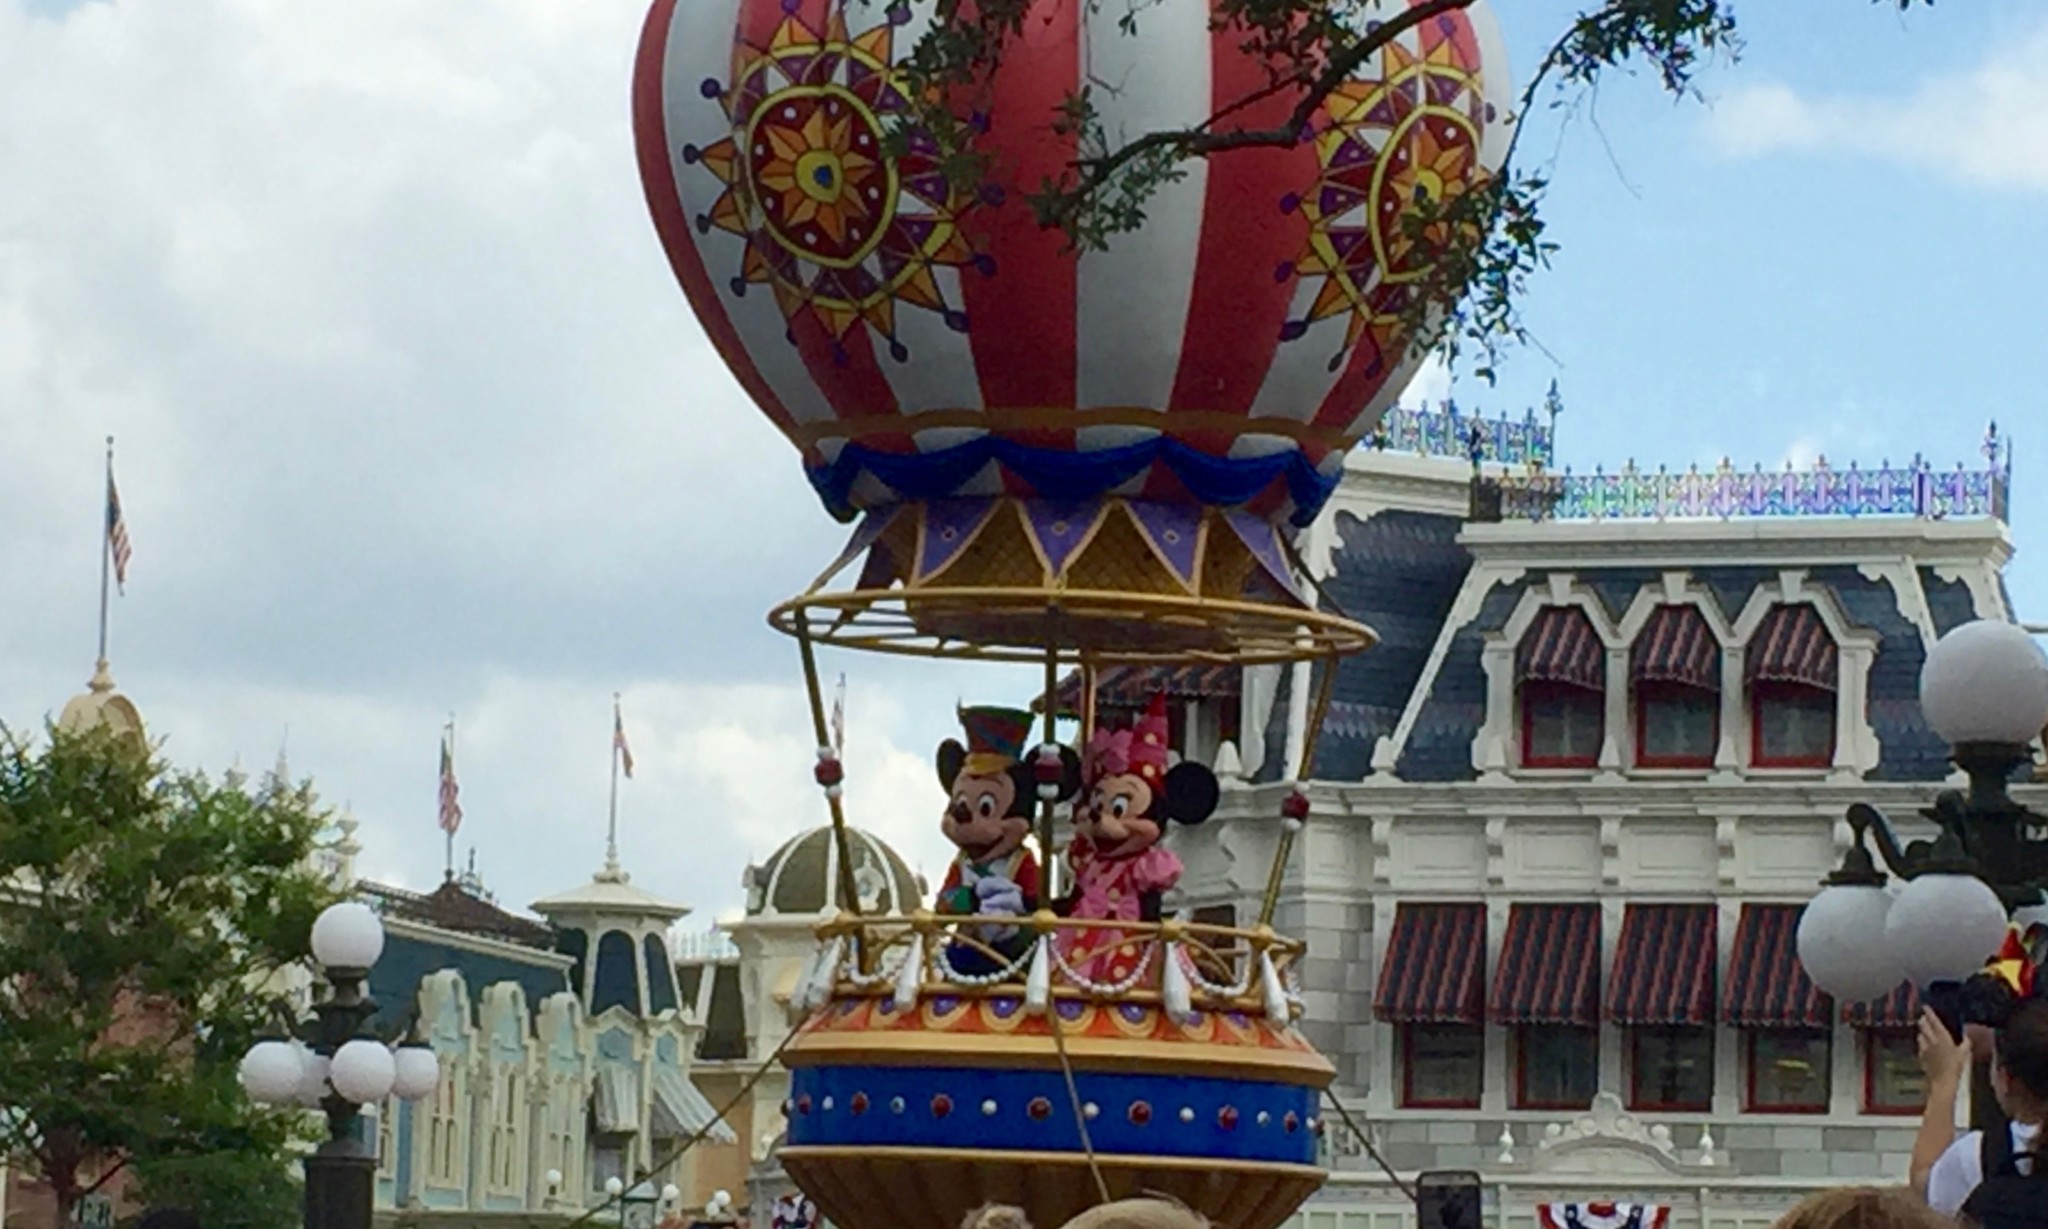 Mickey and Minnie Mouse Float for Magic Kingdom Main Street Parade